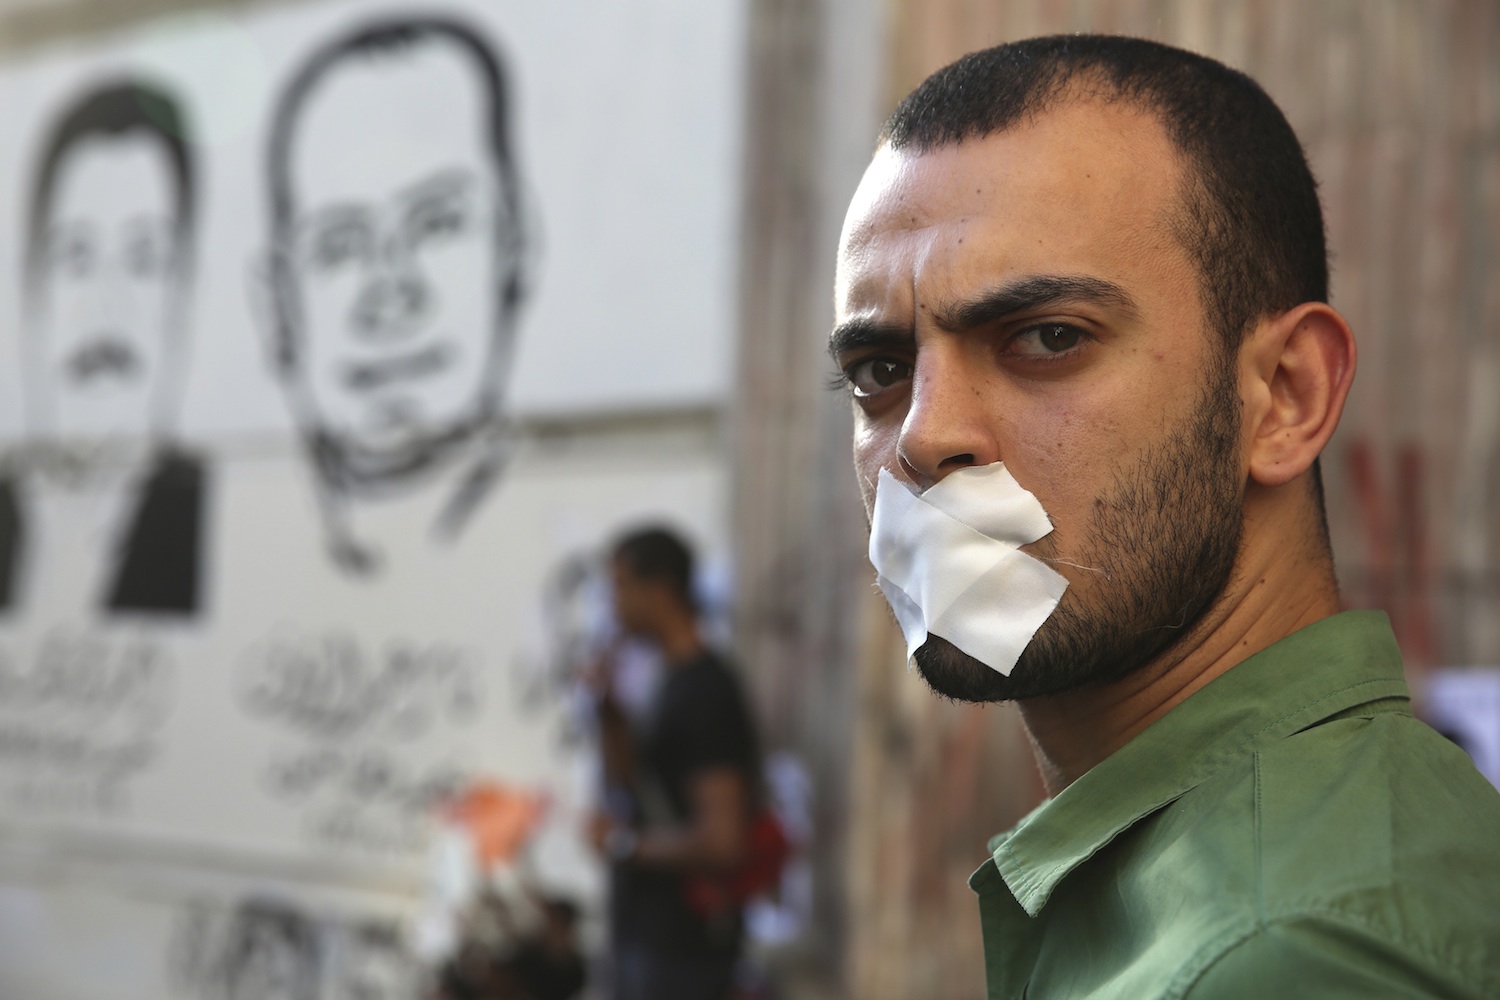 A protester rallies in support of Al Jazeera journalists Abdullah al-Shami and Mohammed Sultan, who were detained by Egyptian authorities, in front of the Press Syndicate in Cairo. June 1, 2014. (Photo: Reuters/Mohamed Abd El Ghany)